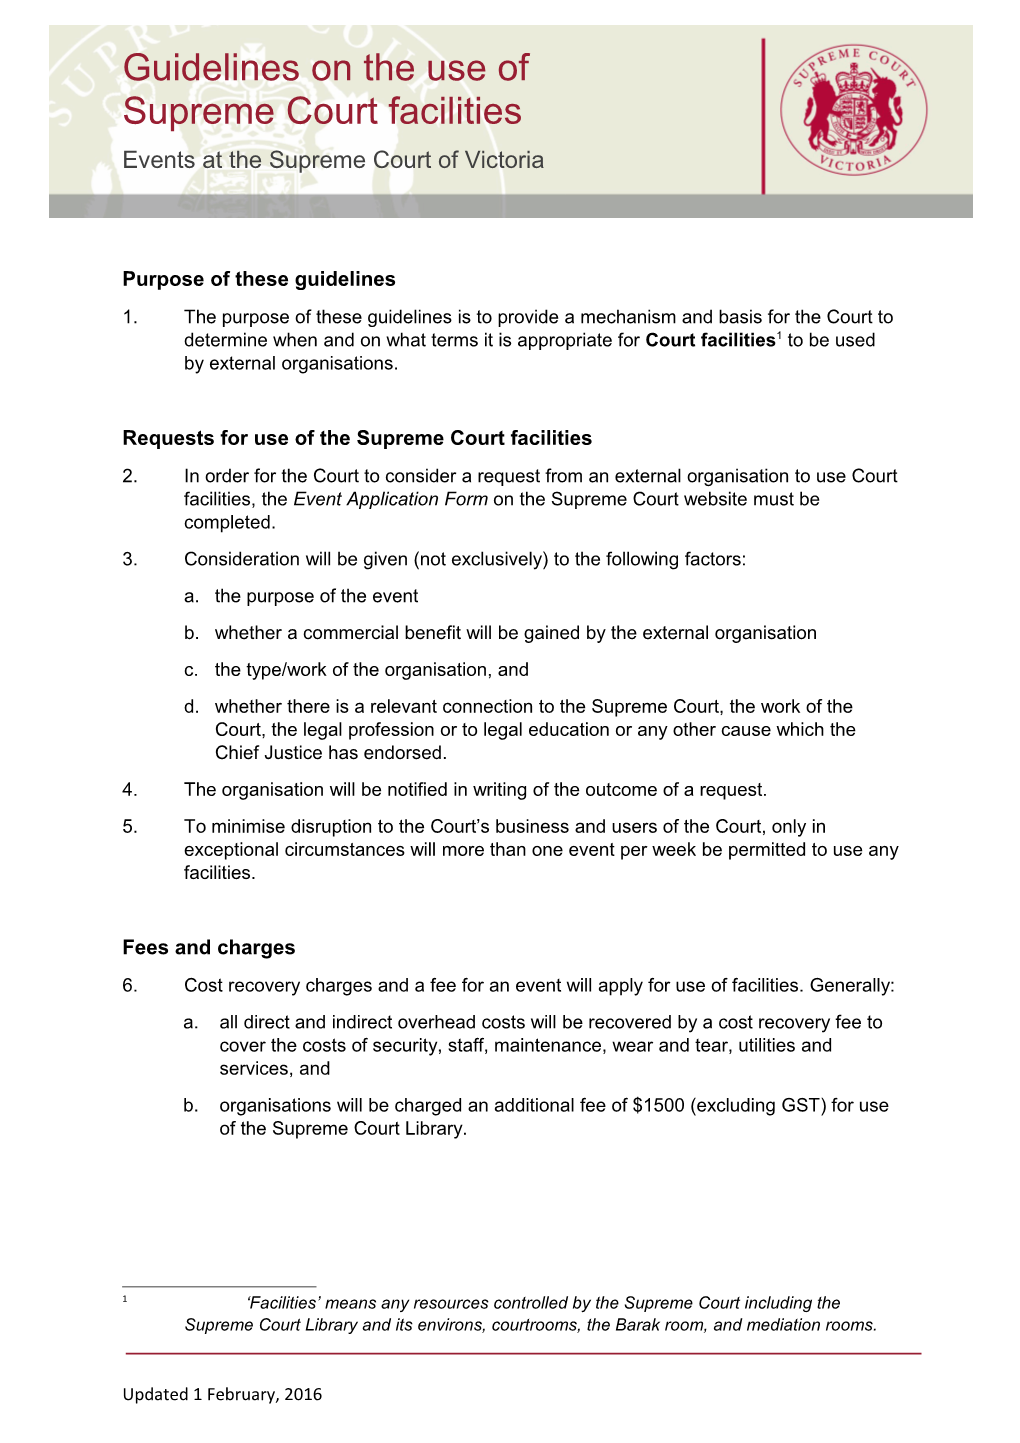 Requests for Use of the Supreme Court Facilities